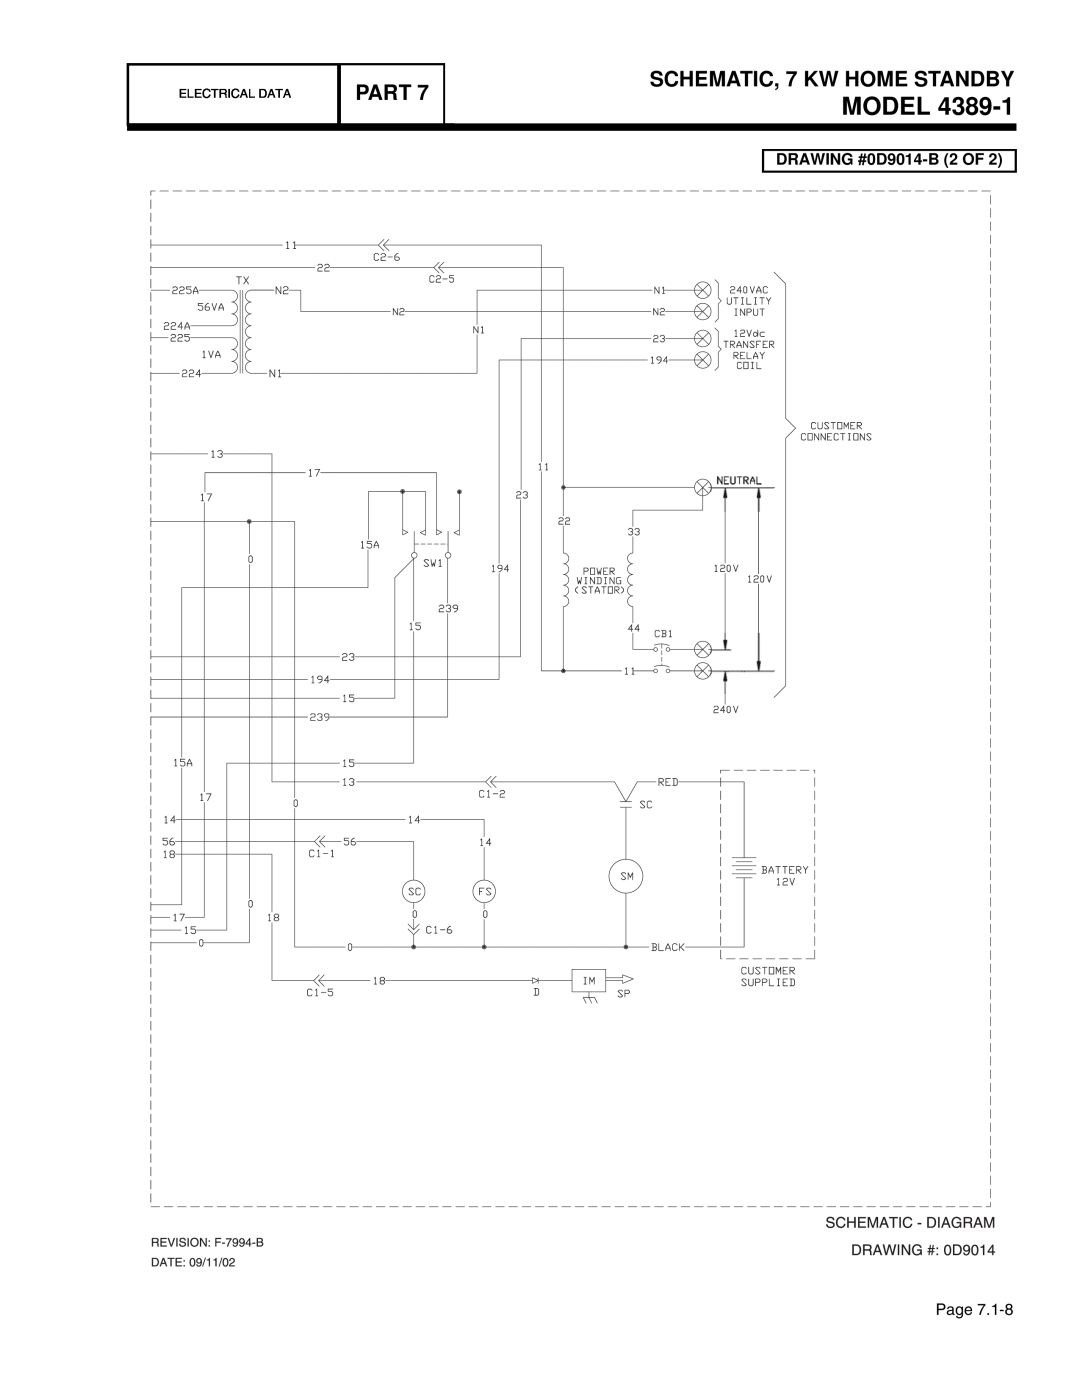 Guardian Technologies 4456, 4390, 4389 Model, Part, SCHEMATIC, 7 KW HOME STANDBY, DRAWING #0D9014-B 2 OF, Electrical Data 